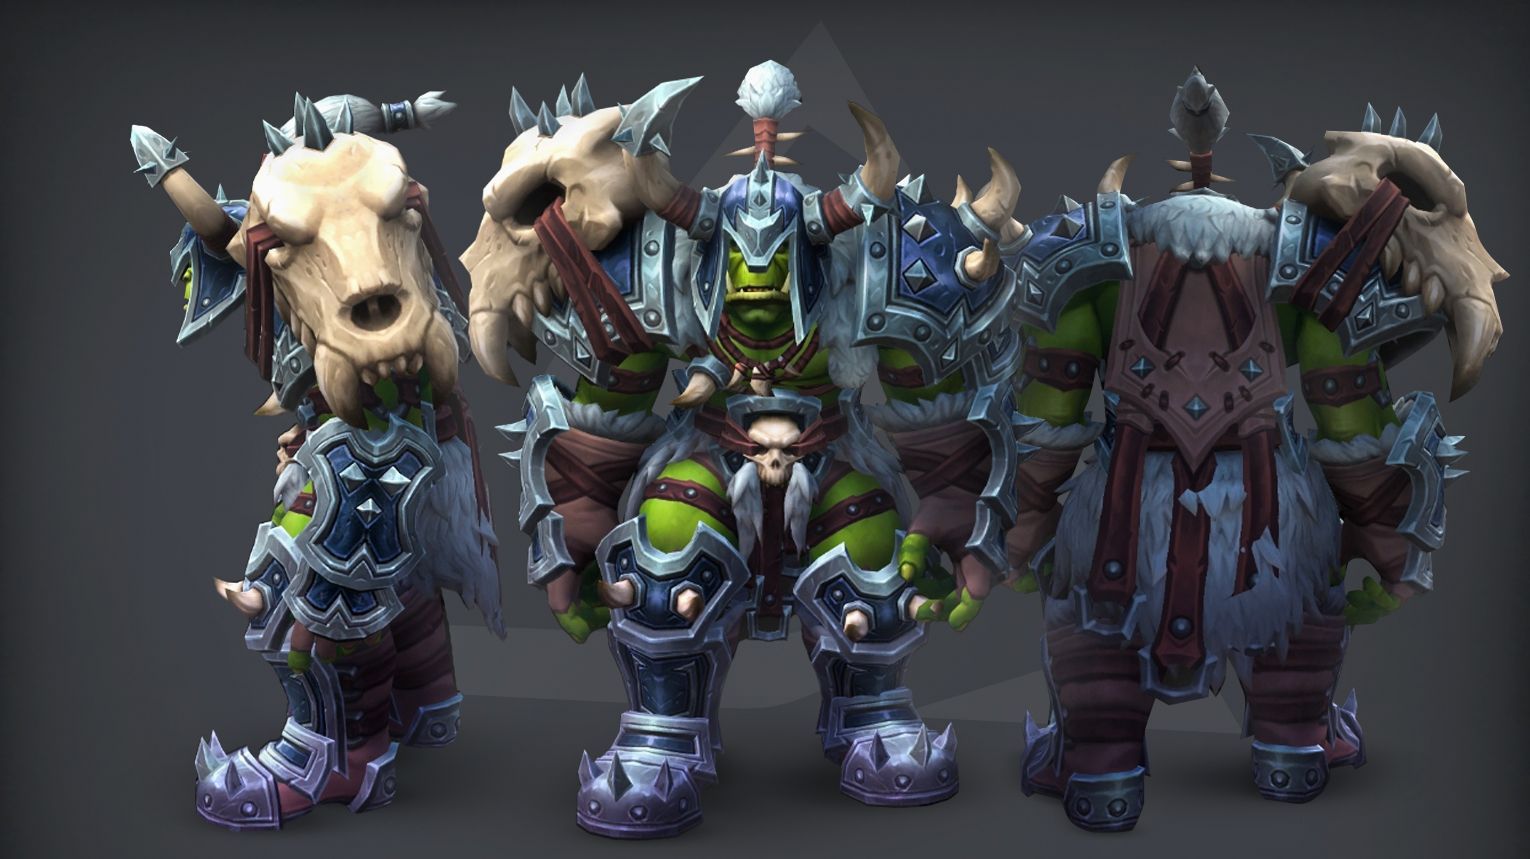 Orc Heritage Armor